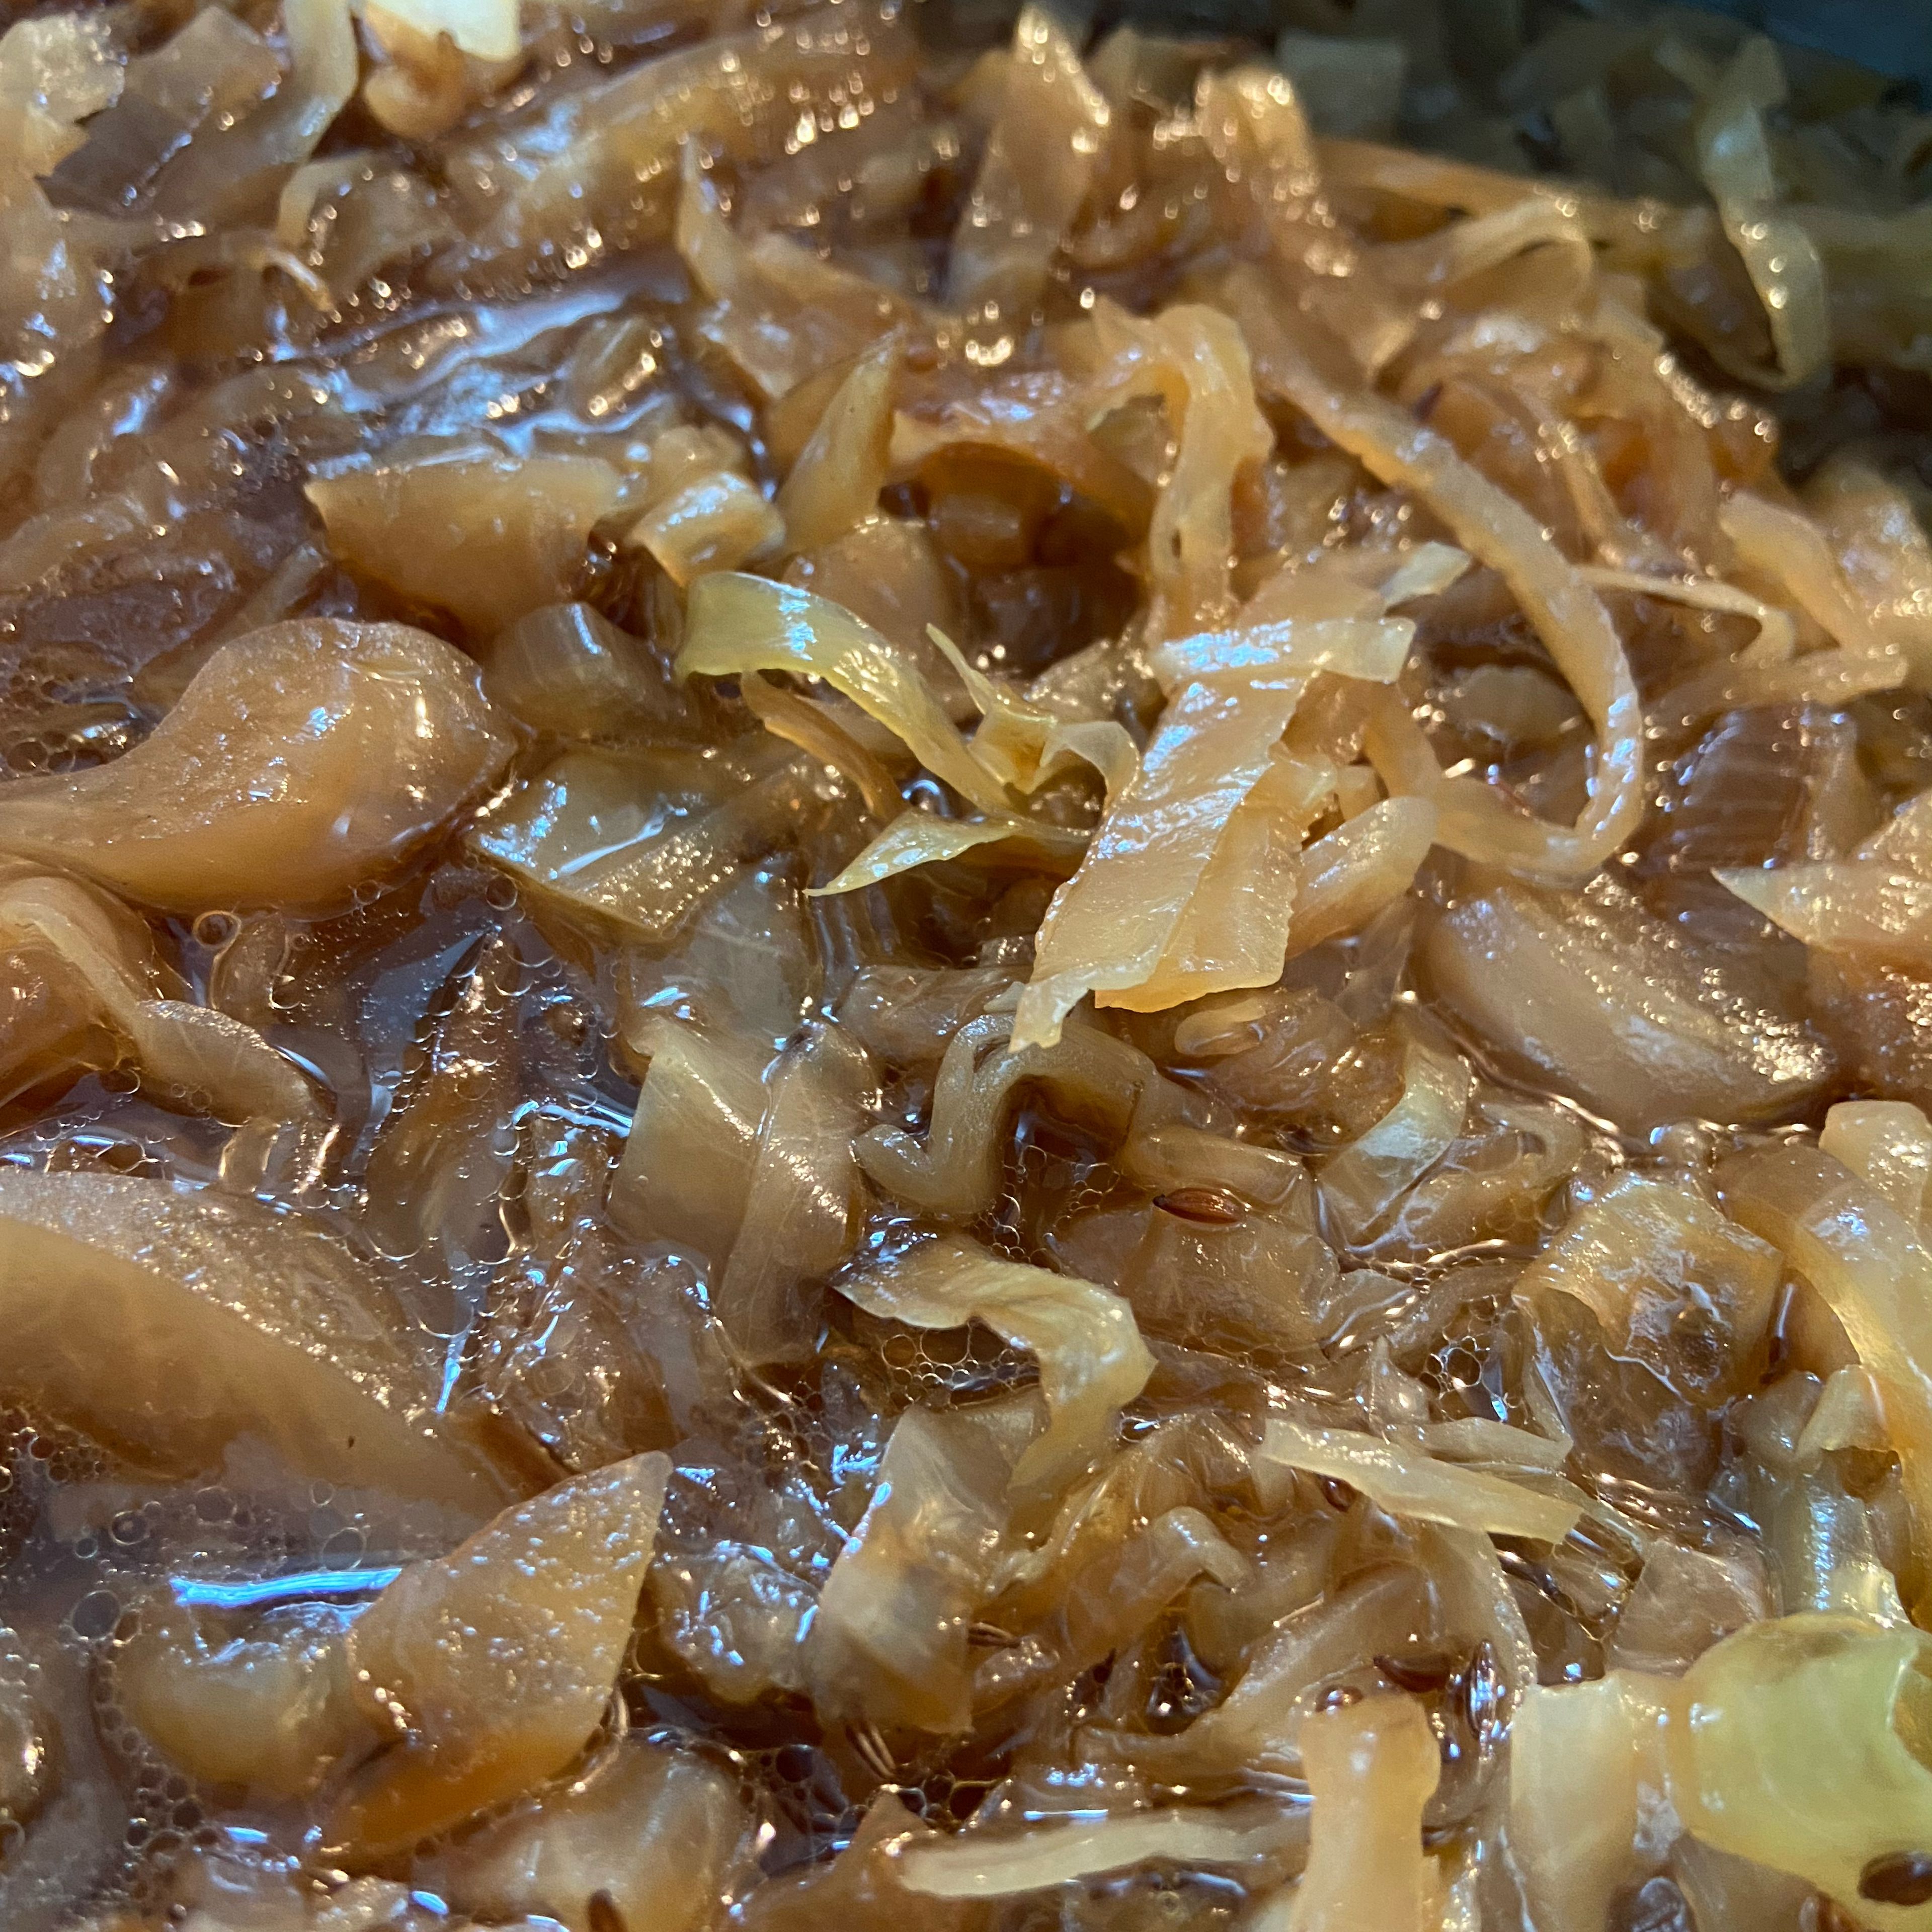 Add 1/2 tbsp caraway seeds, 1 tbsp brown sugar, 1 pinch of salt and pepper to the cabbage and let simmer gently for approx. 1 hr.